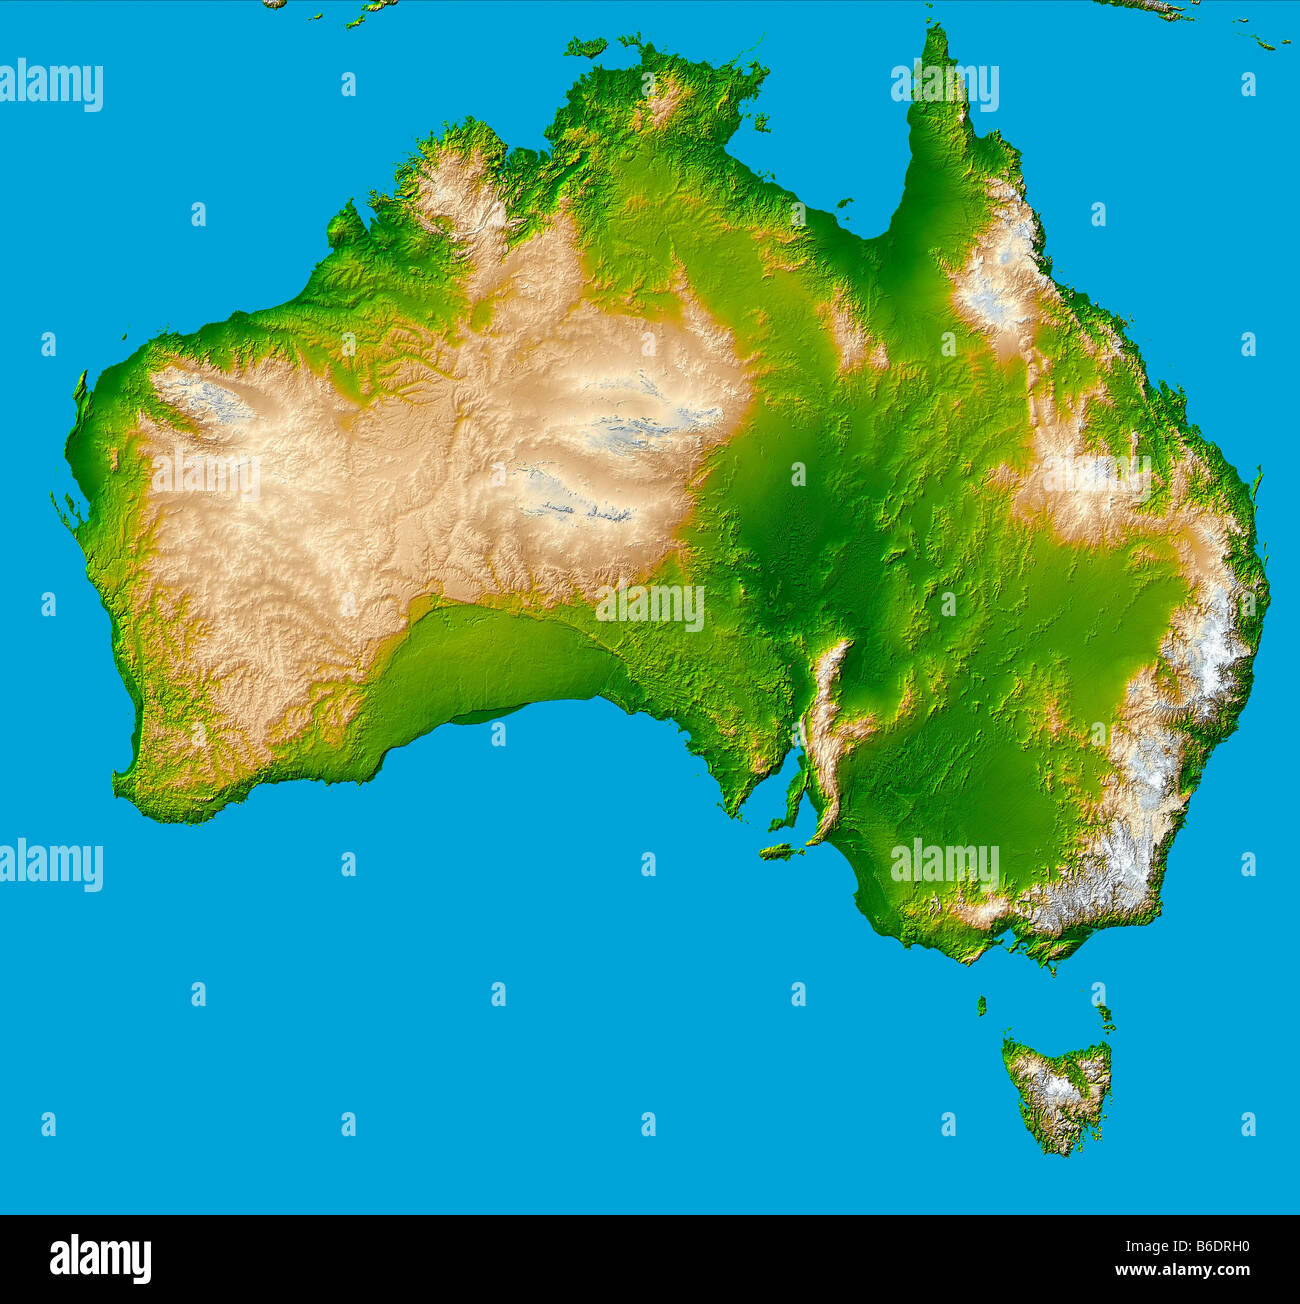 Australia. Computer-enhanced topographical image of the continent of Australia. Stock Photo